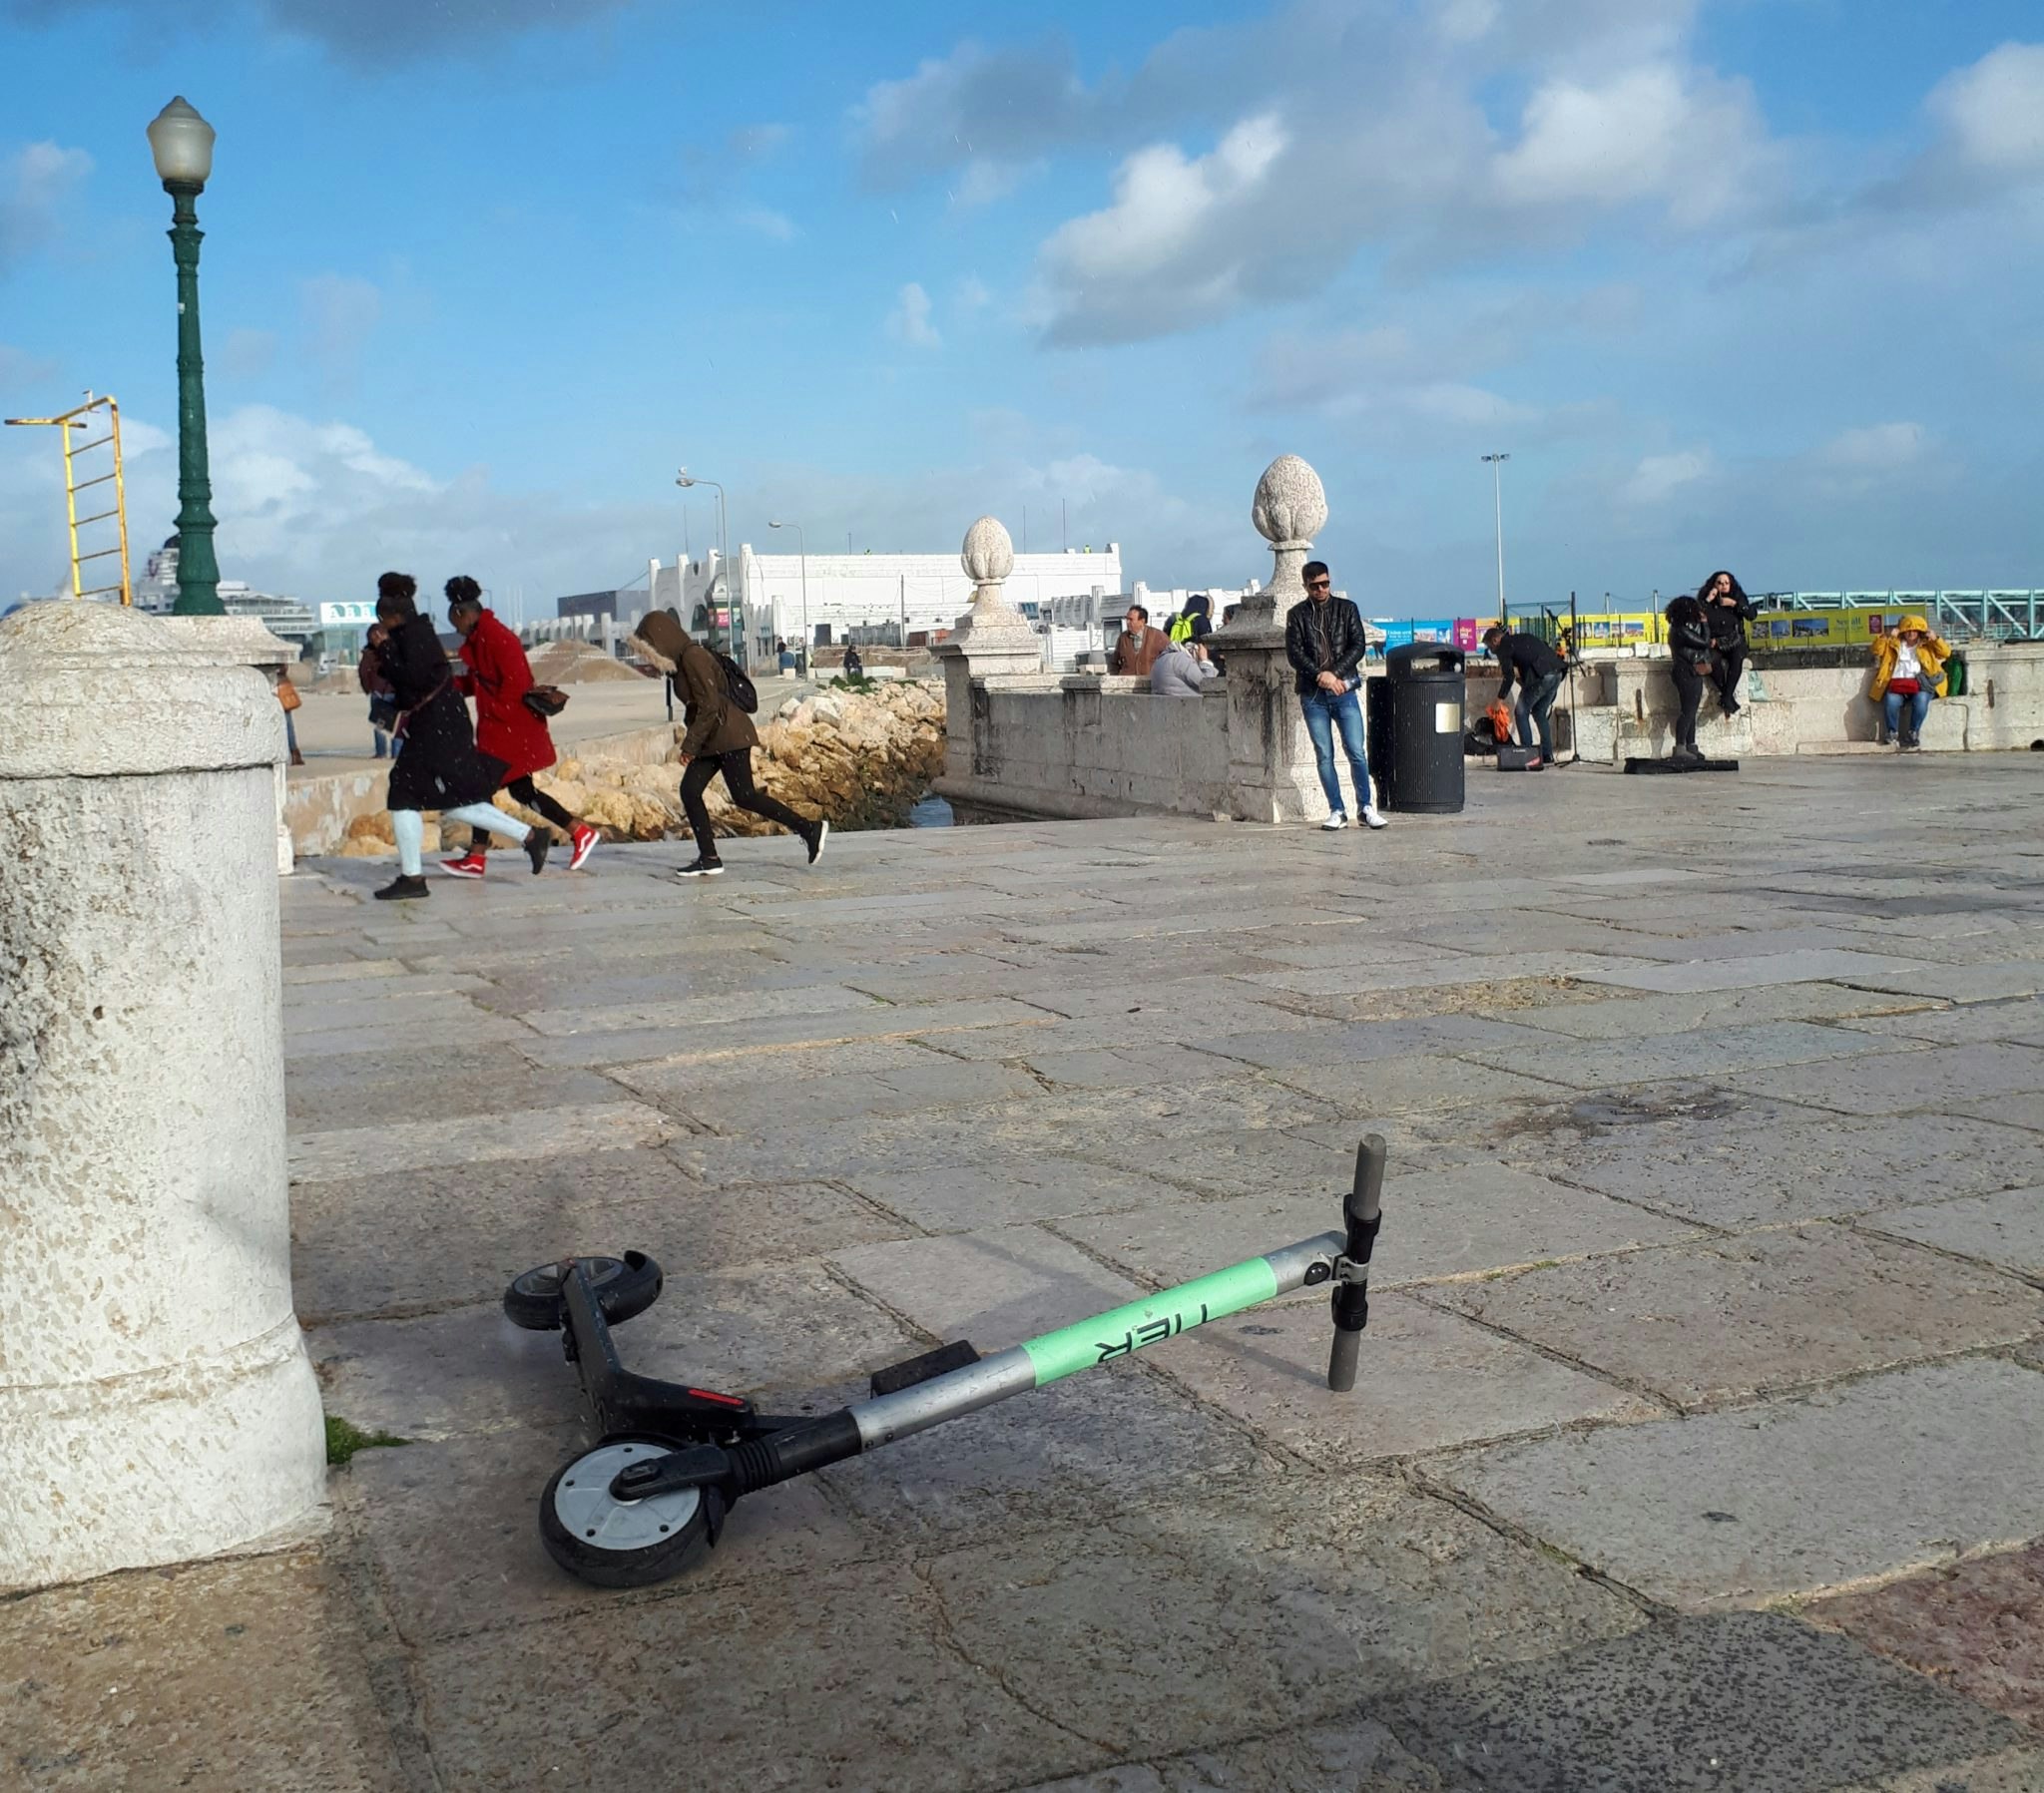 A Tier scooter in Lisbon.